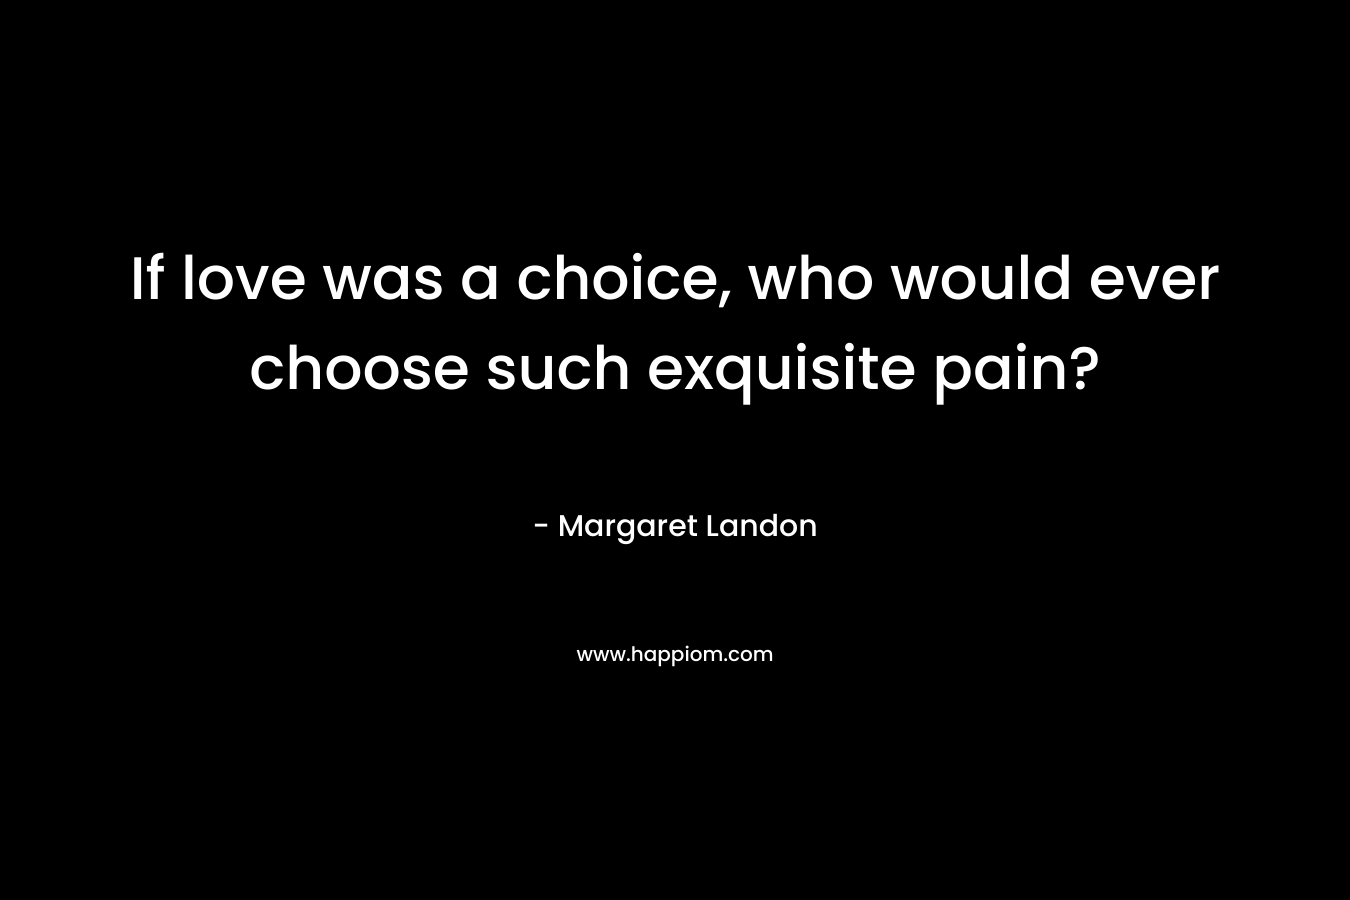 If love was a choice, who would ever choose such exquisite pain?